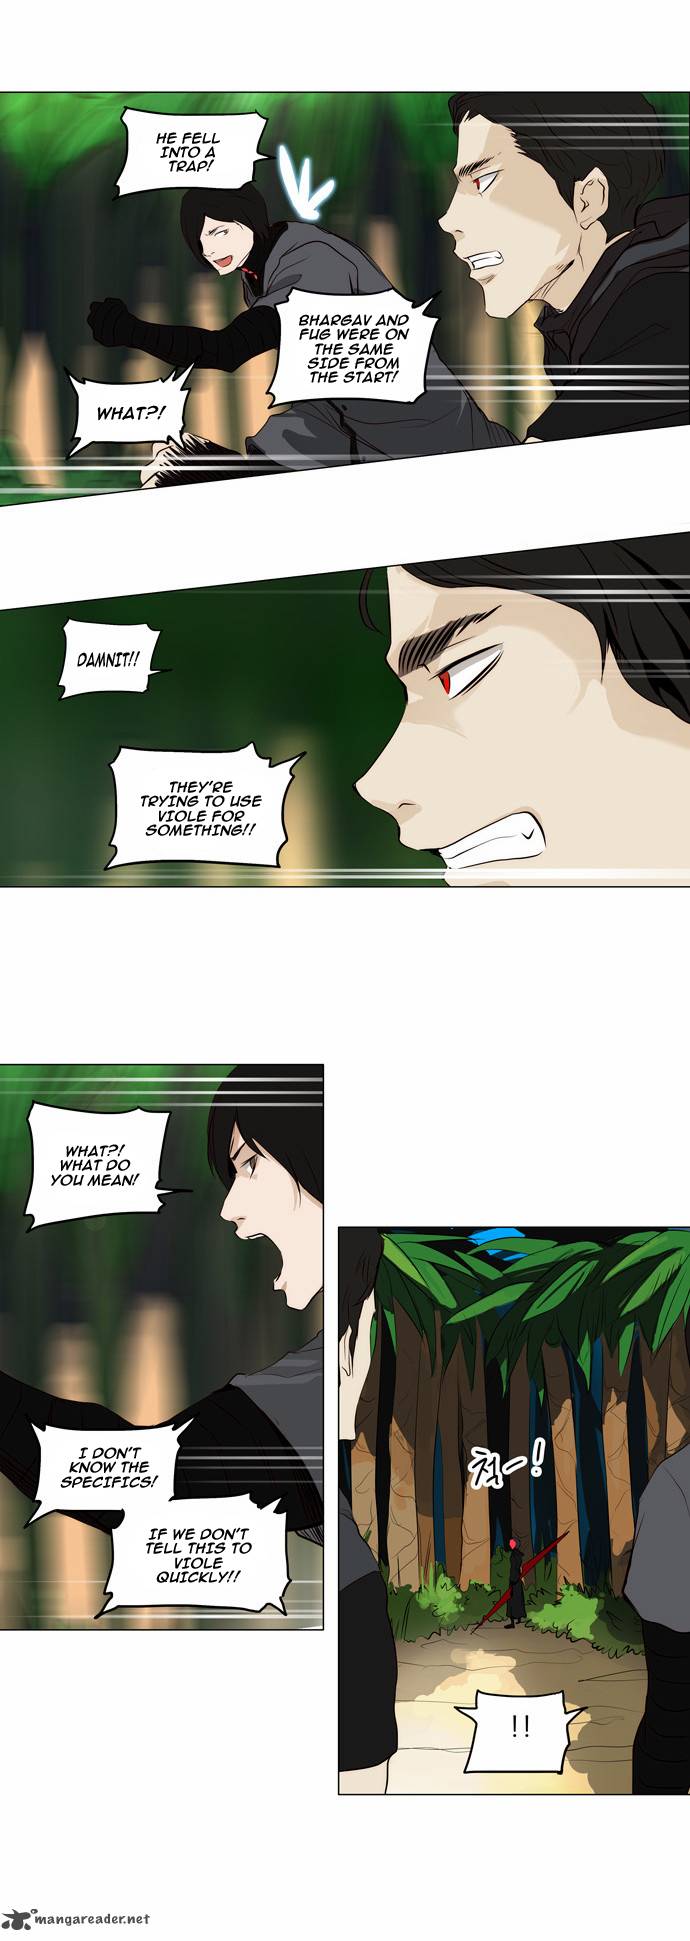 Tower Of God 164 19